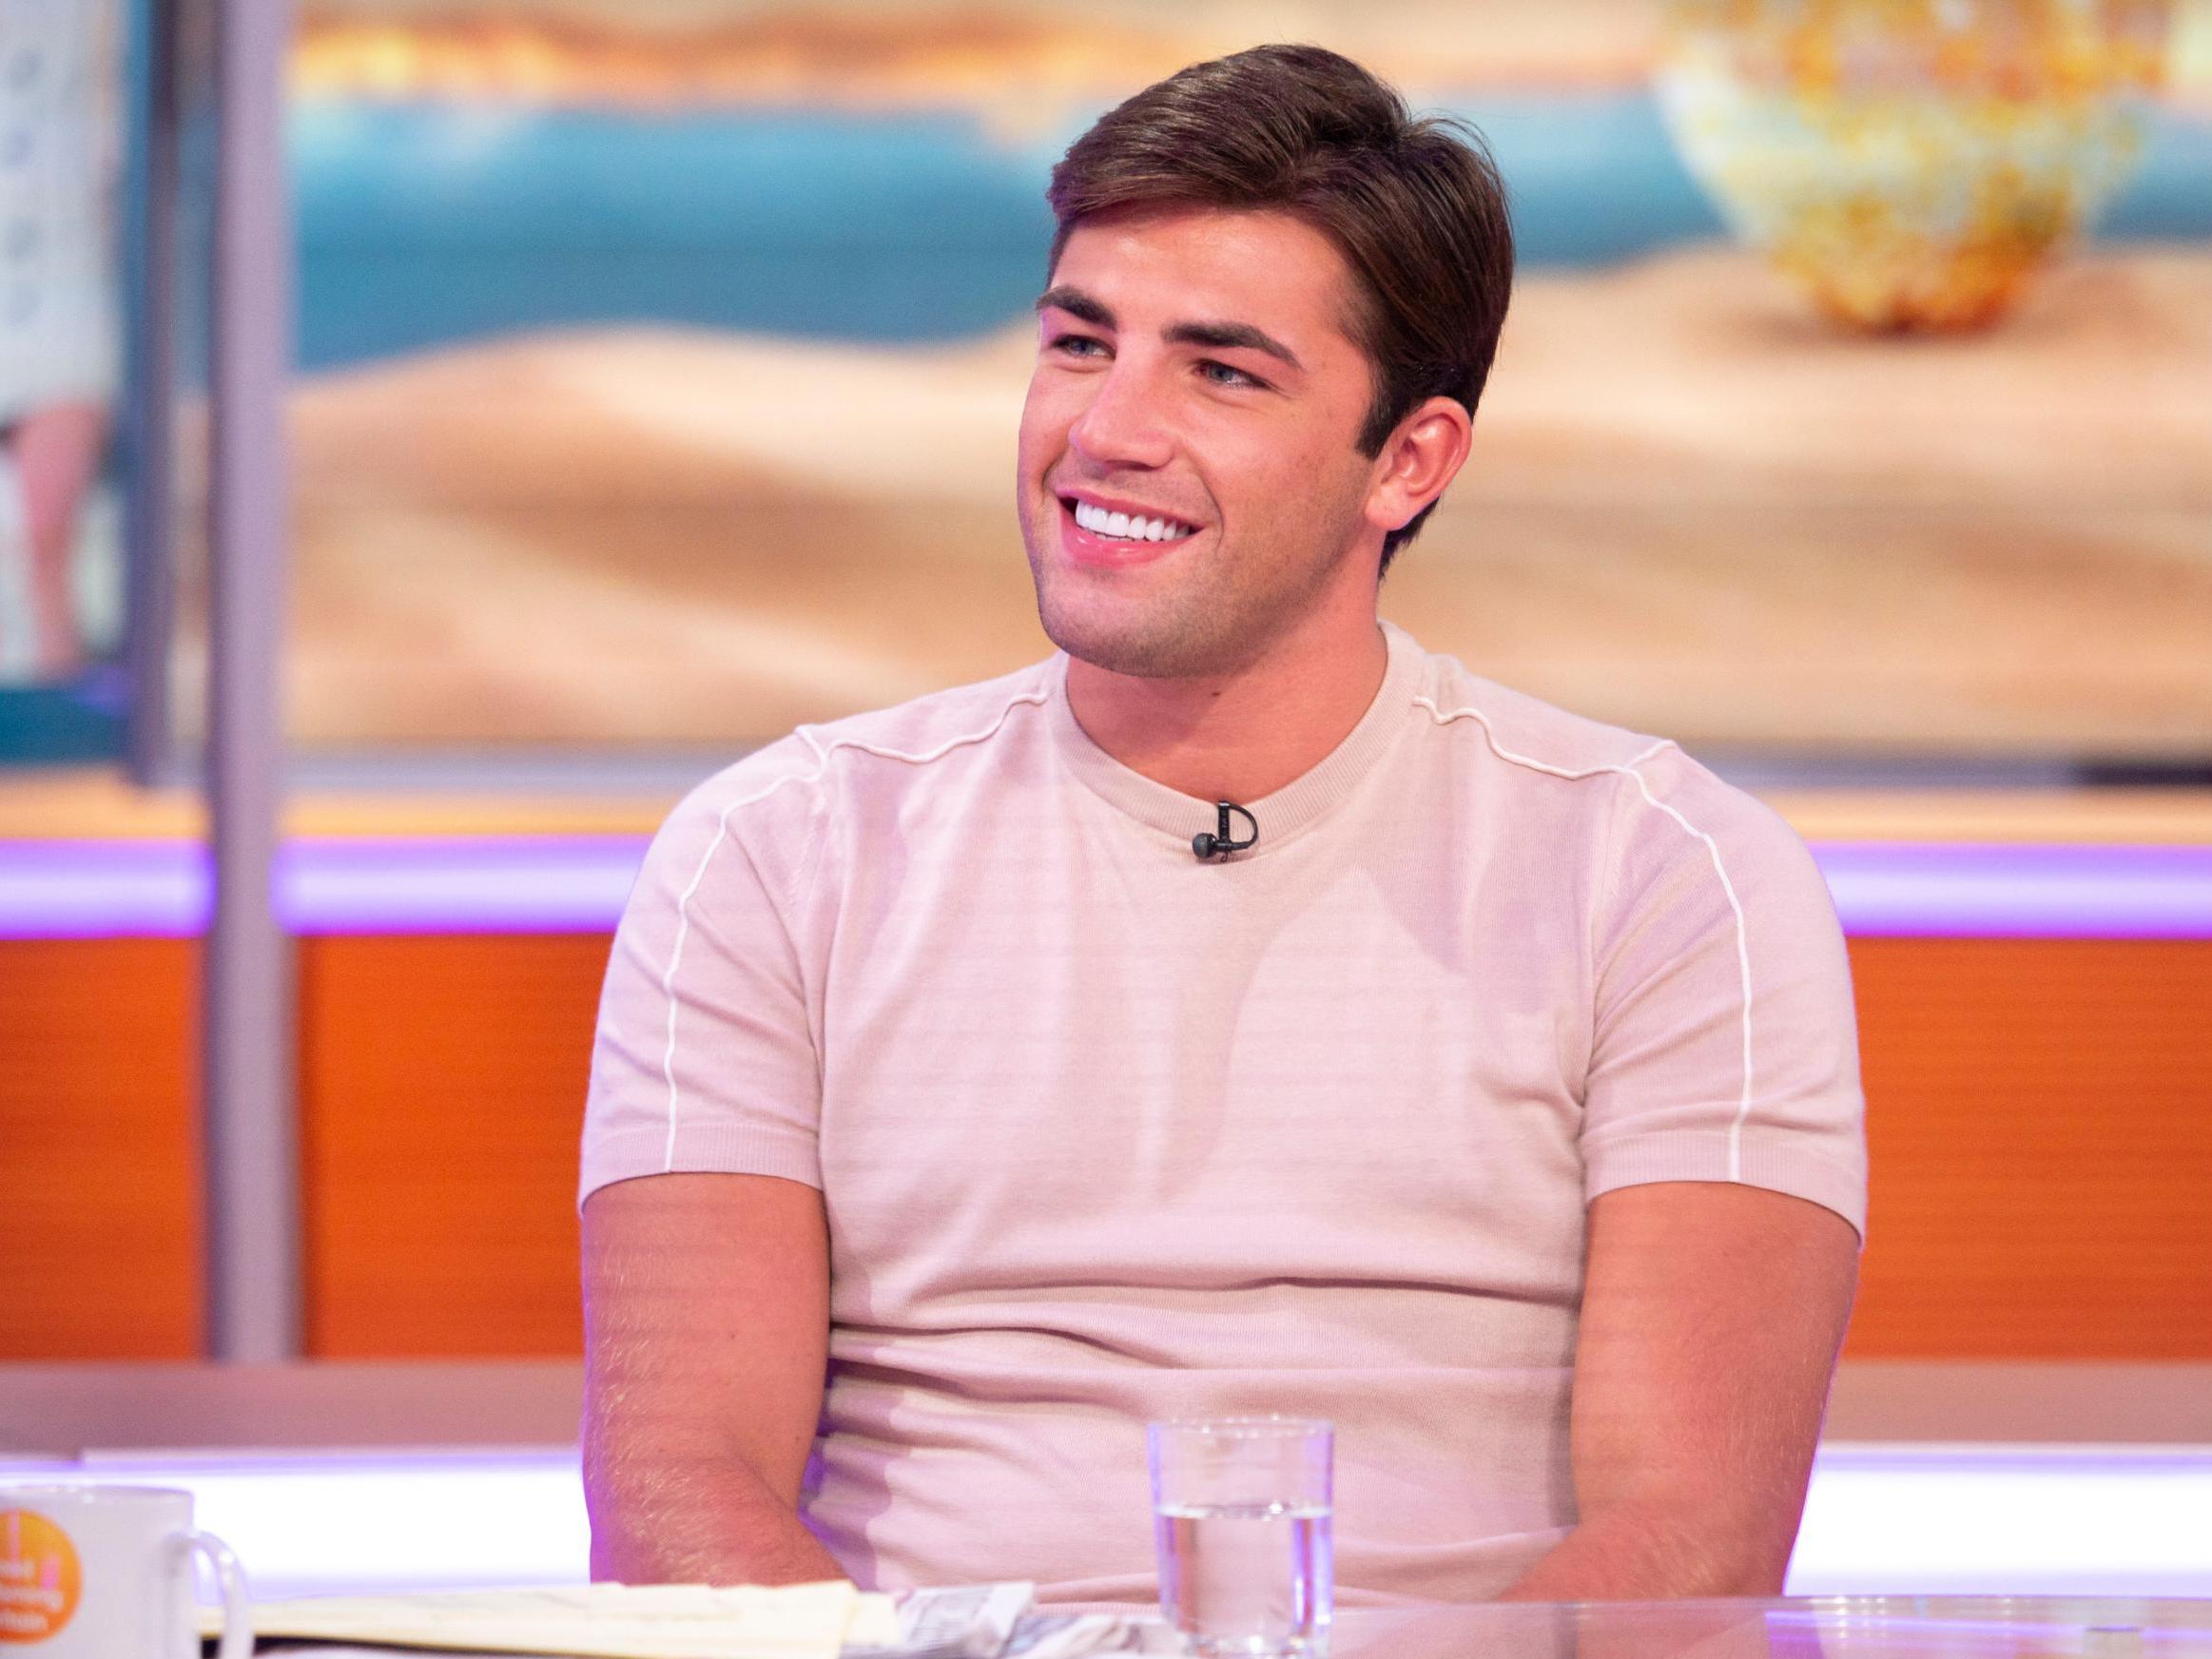 Love Island’s Jack Fincham discusses body insecurities on ‘Good Morning Britain’